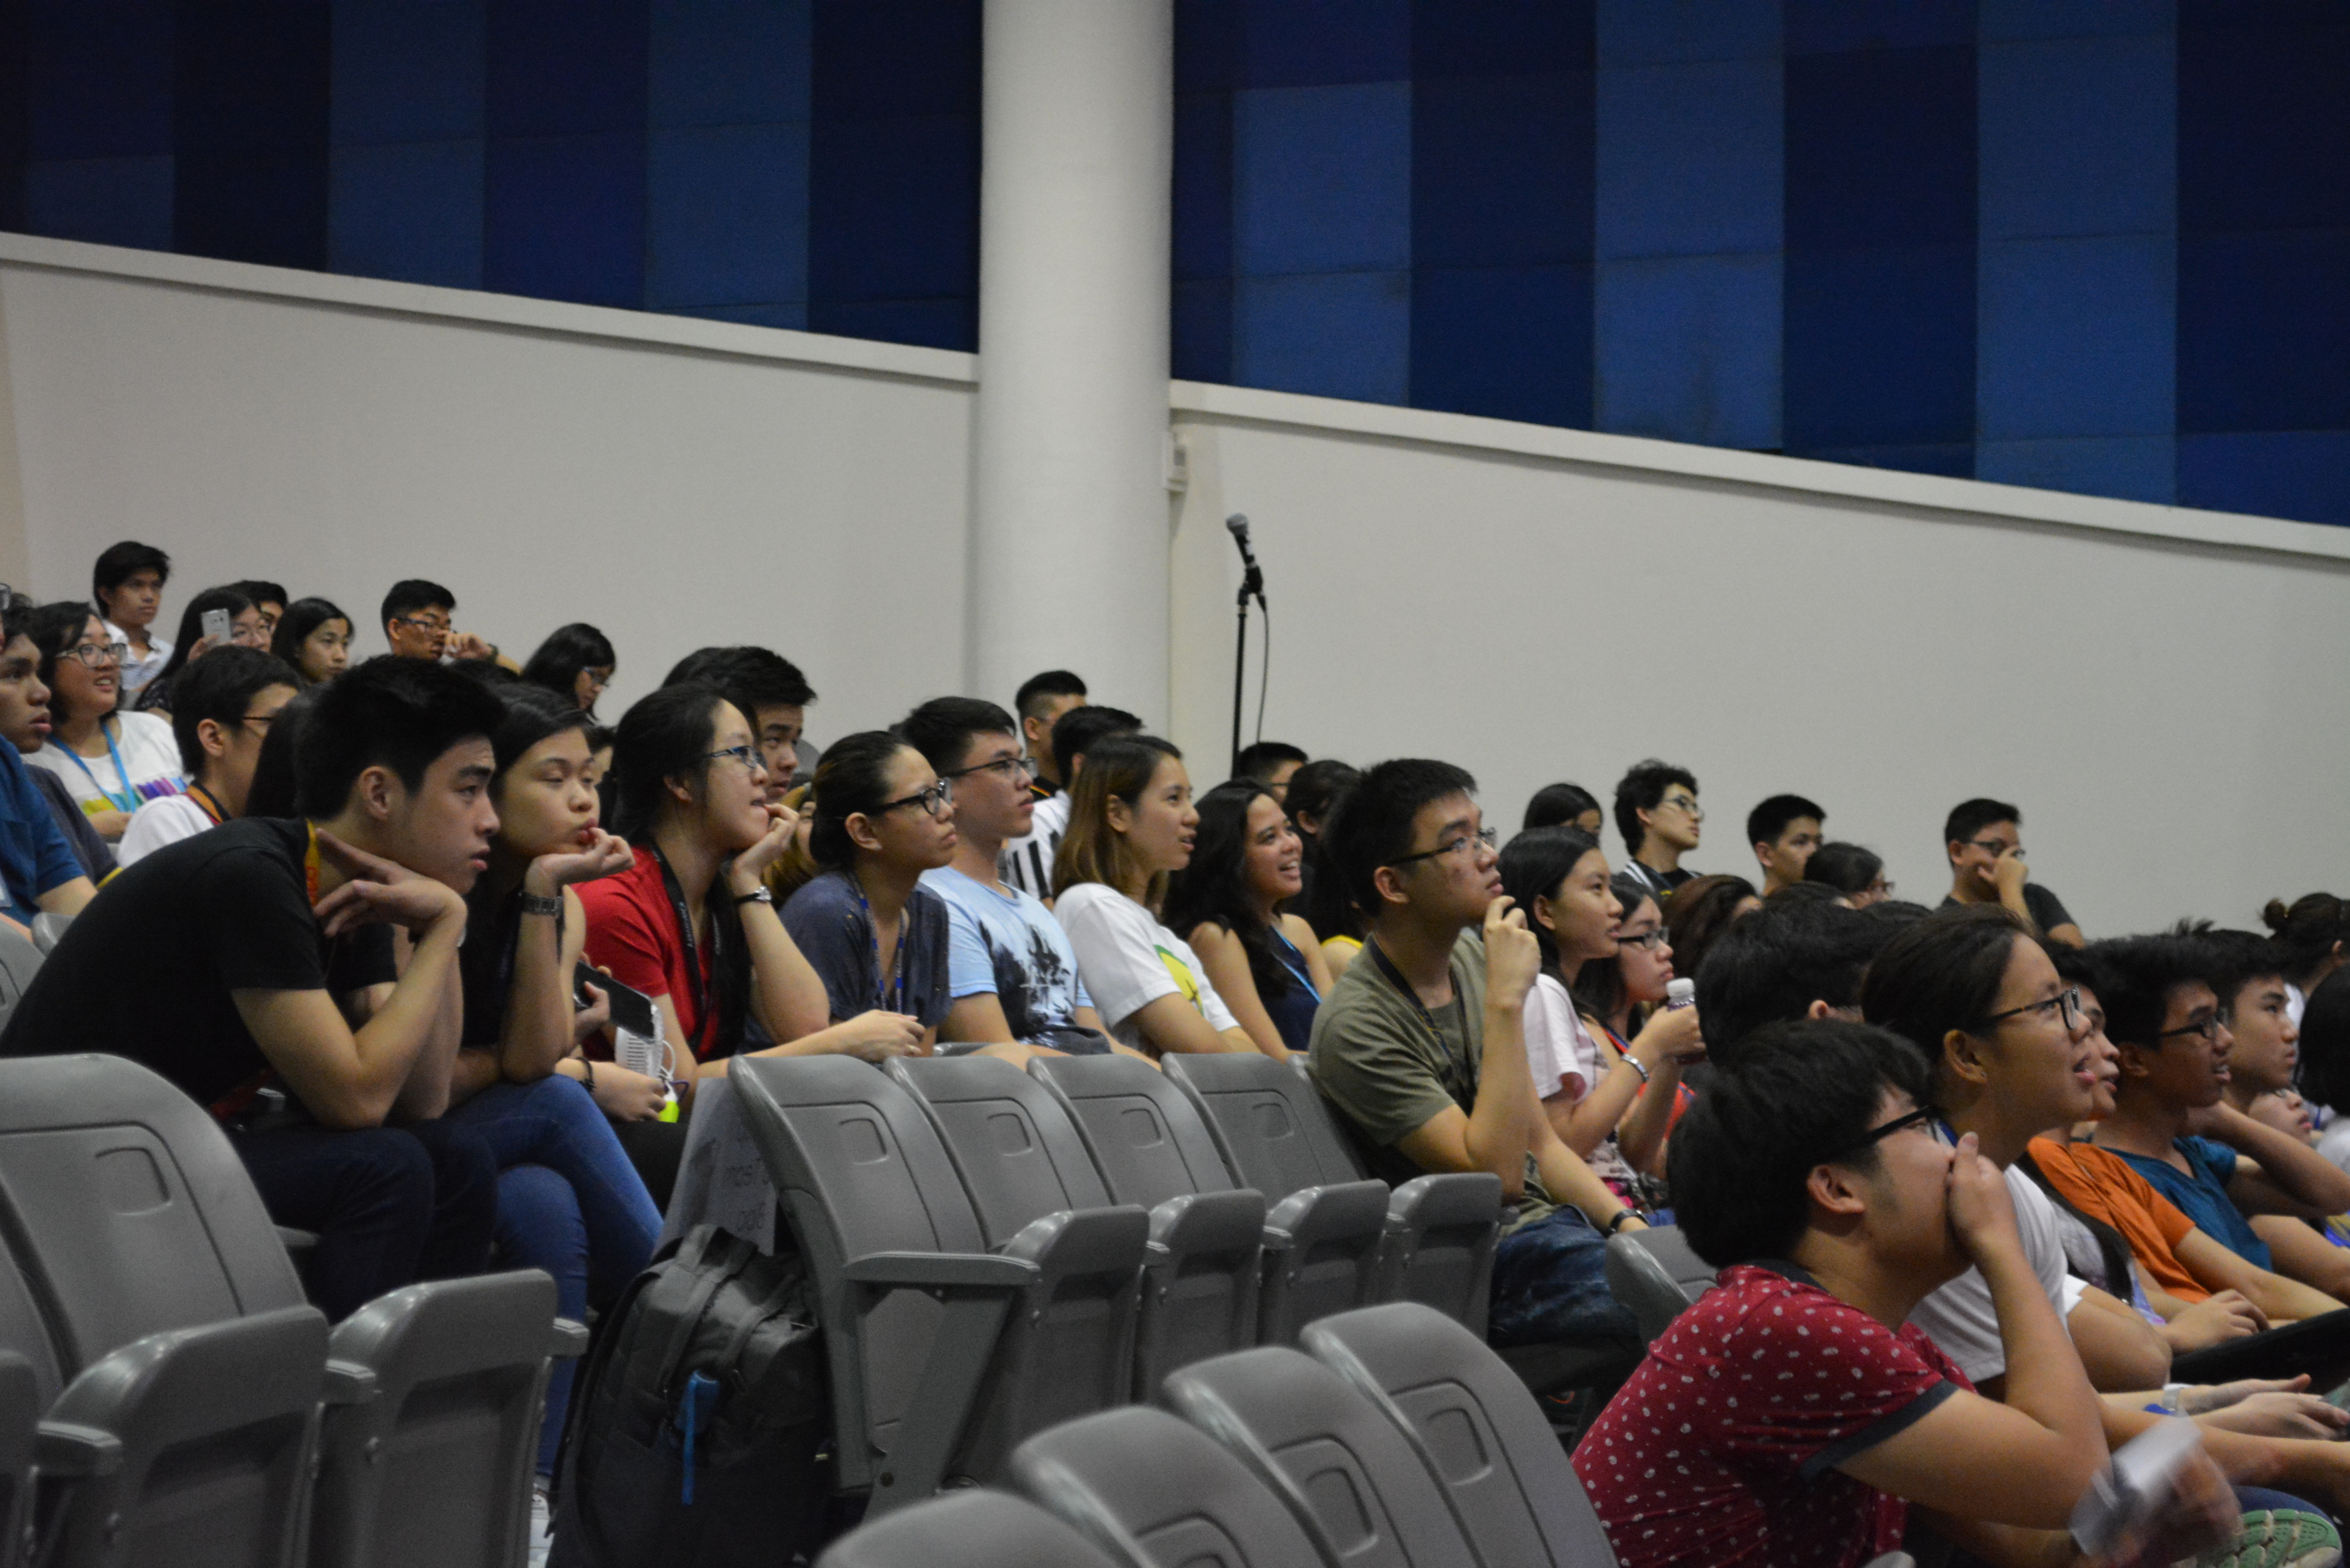 Celadon members listening attentively to the talks. Photo by Regine Choa.